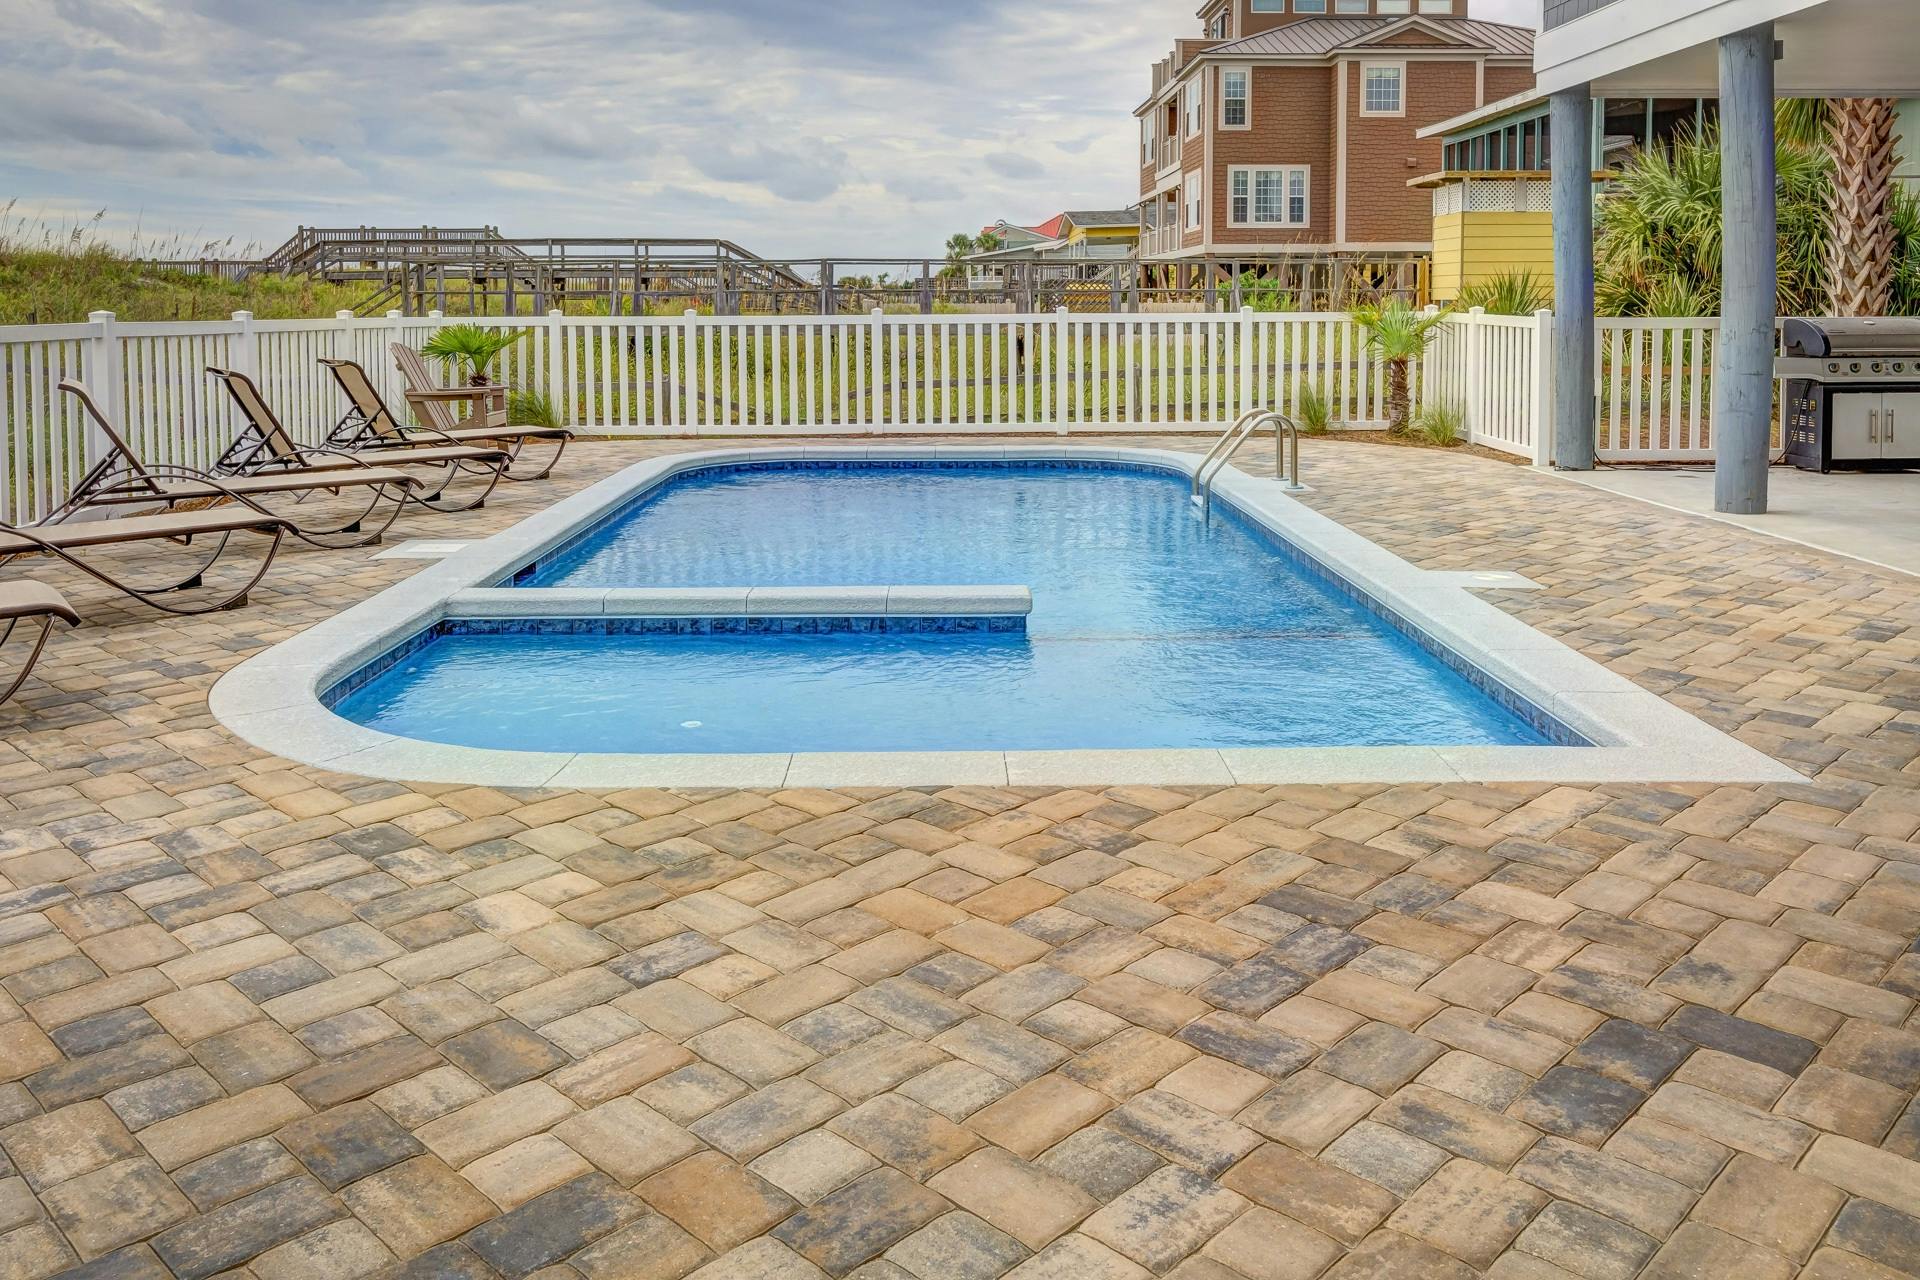 How To Pressure Your Swimming Pool Tiles In Harford County, MD
